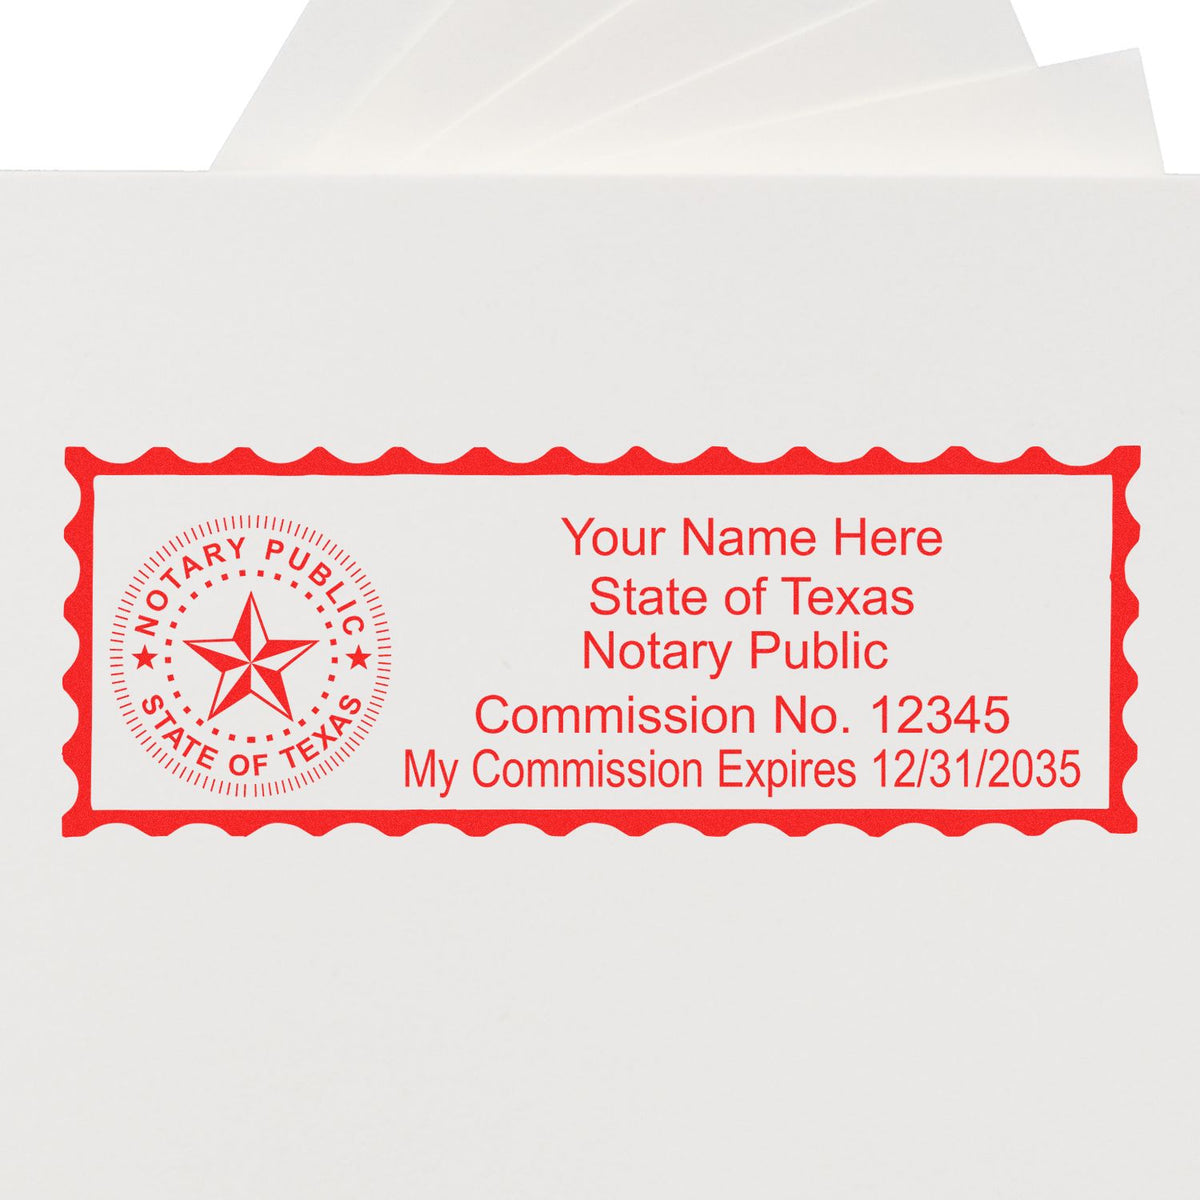 A stamped impression of the PSI Texas Notary Stamp in this stylish lifestyle photo, setting the tone for a unique and personalized product.